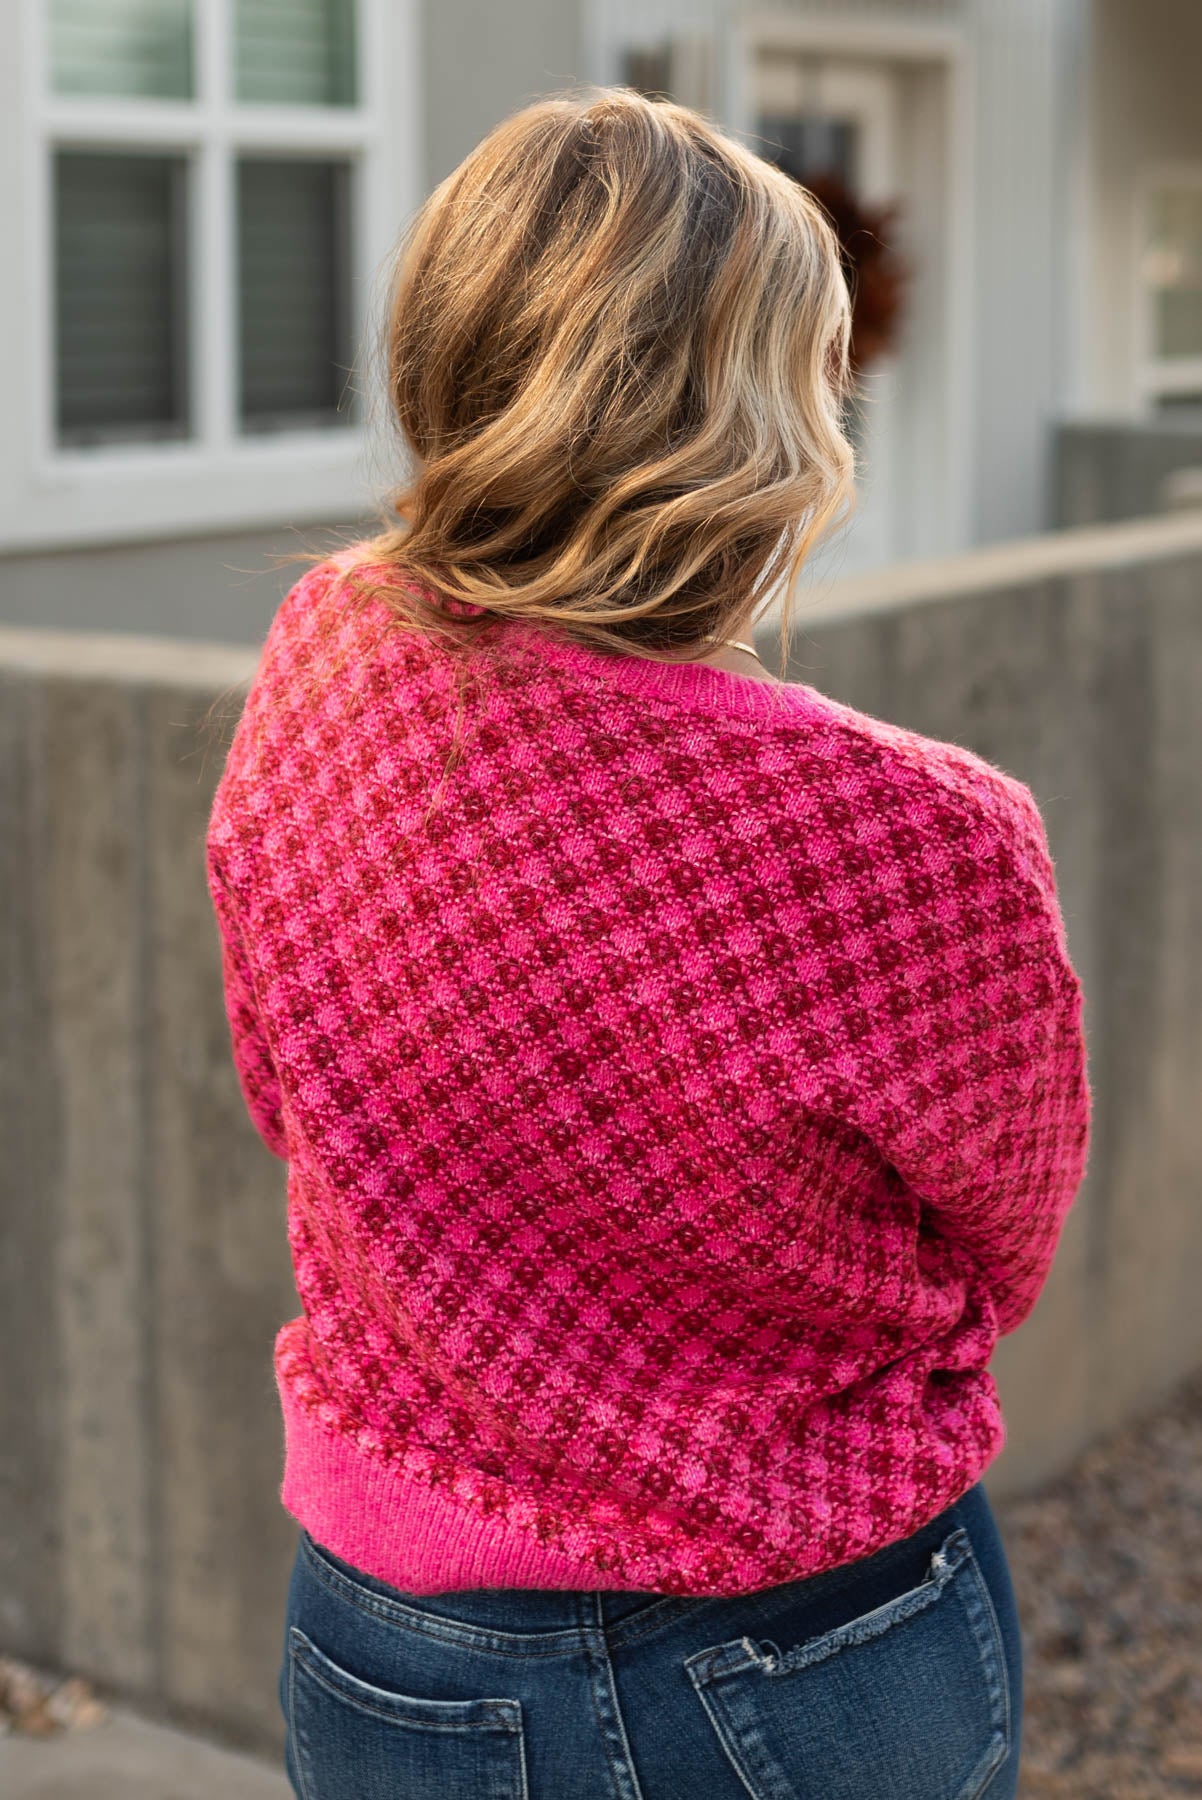 Back view of a pink pattern sweater